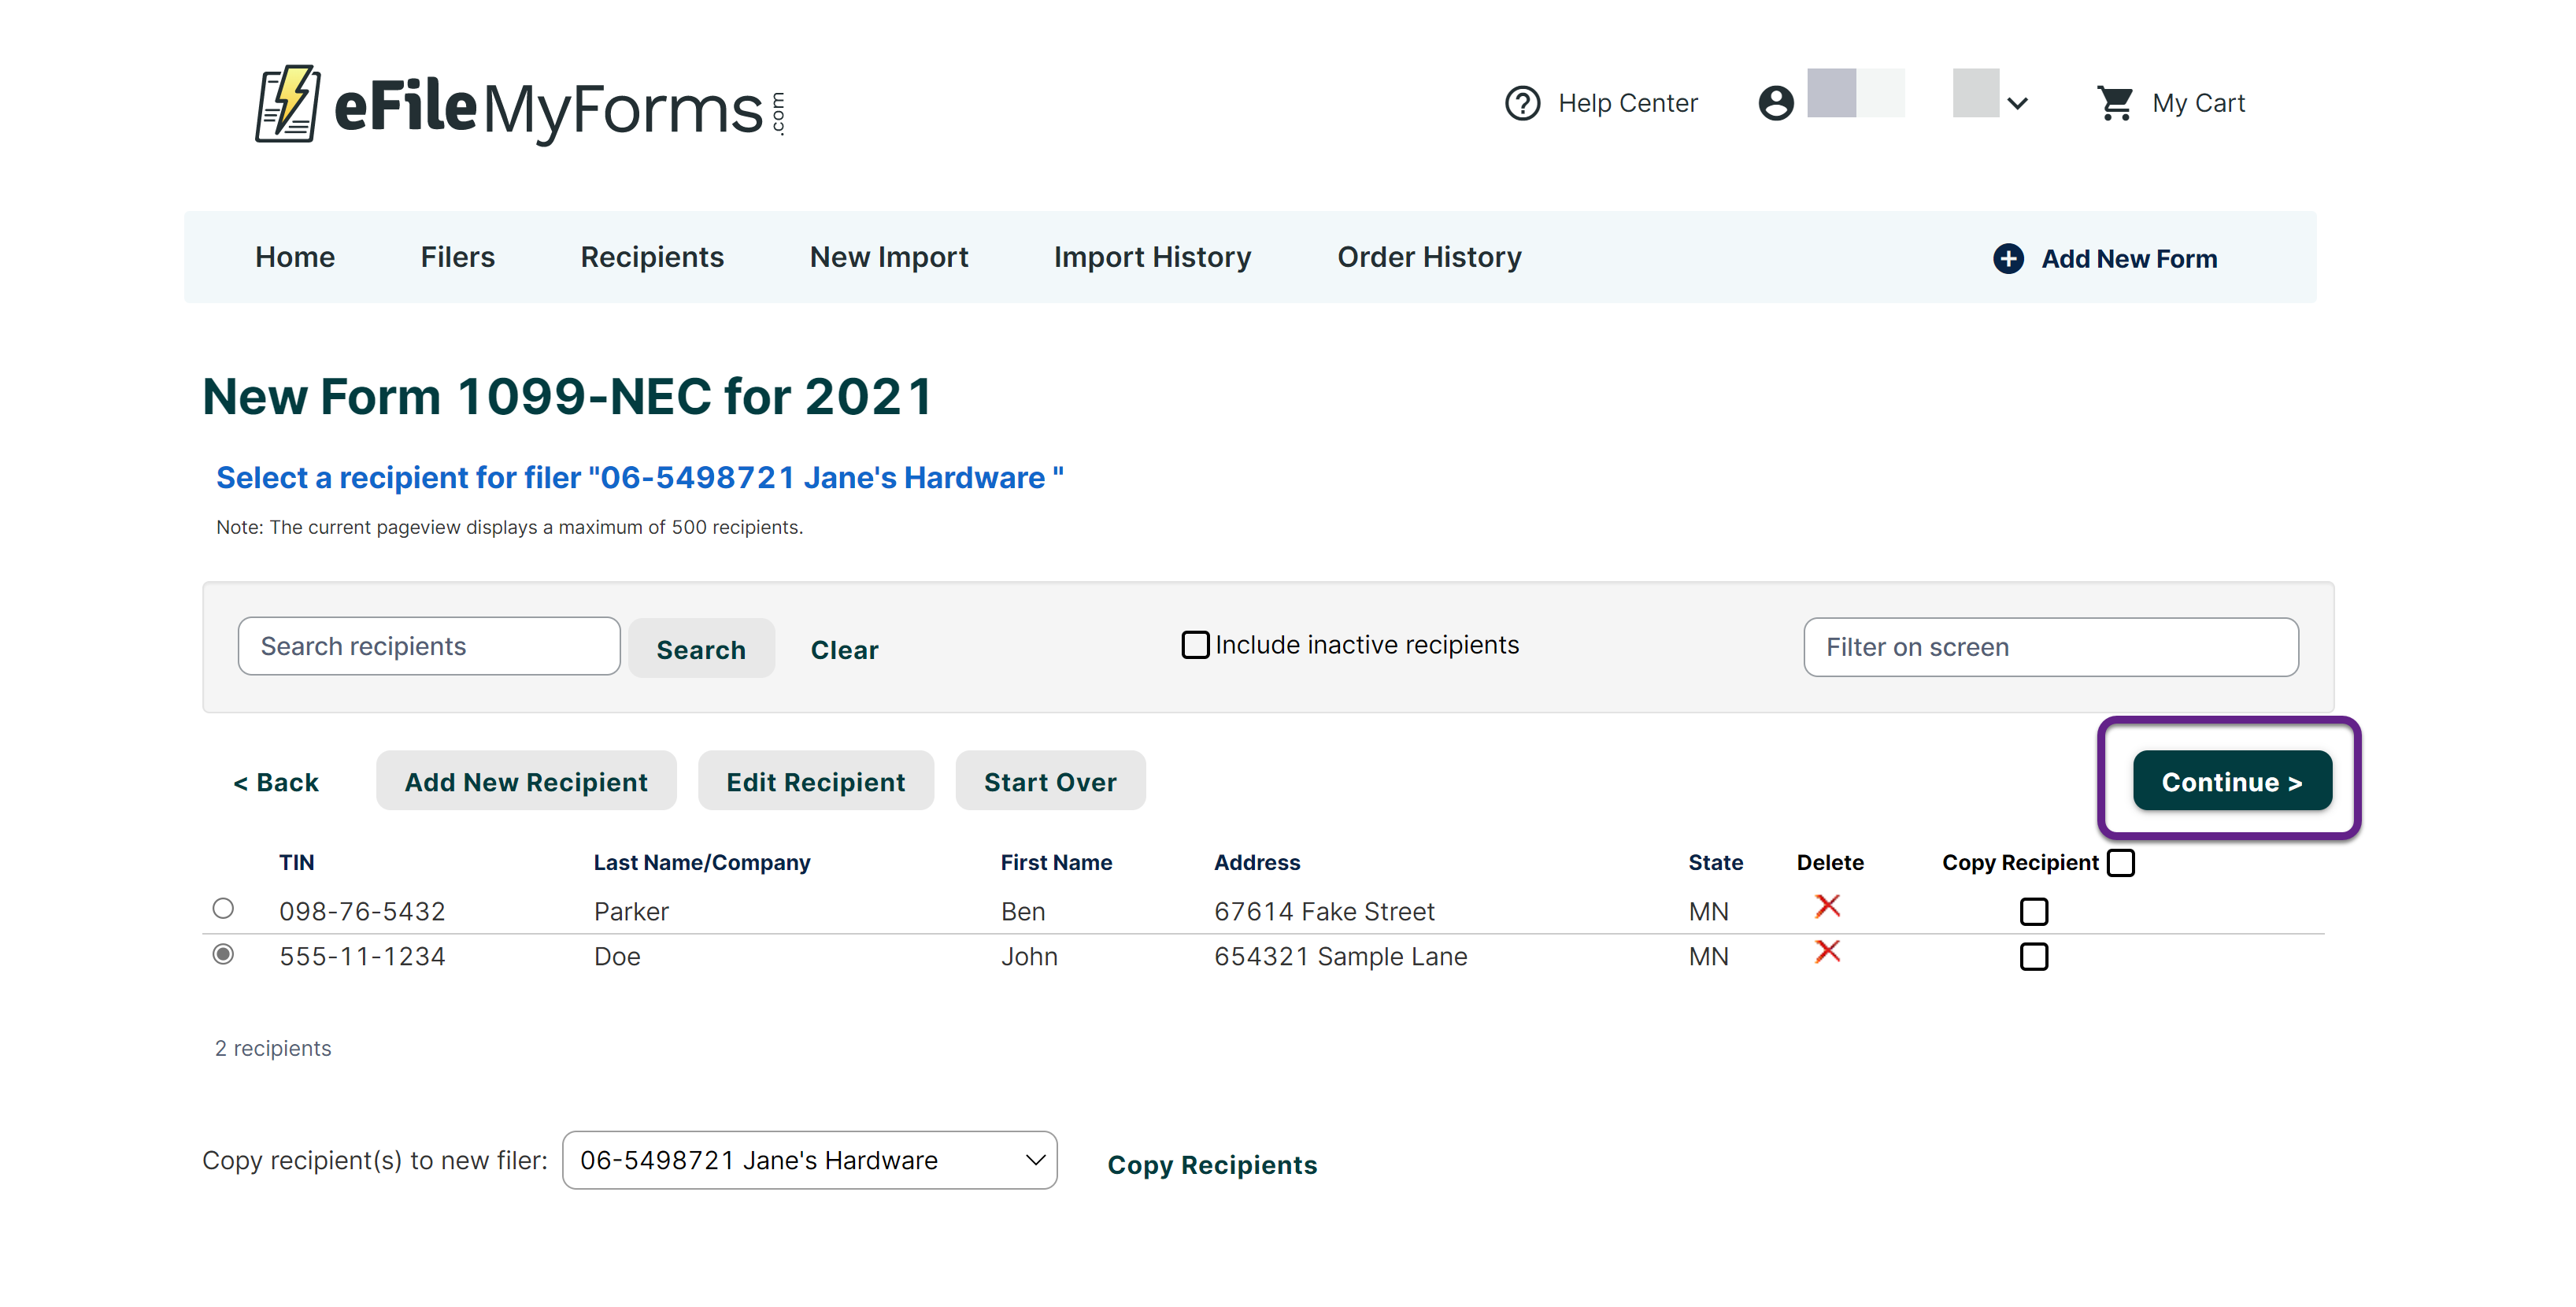 Image of the New Form 1099-NEC for 2021 page with a callout on the Continue button.